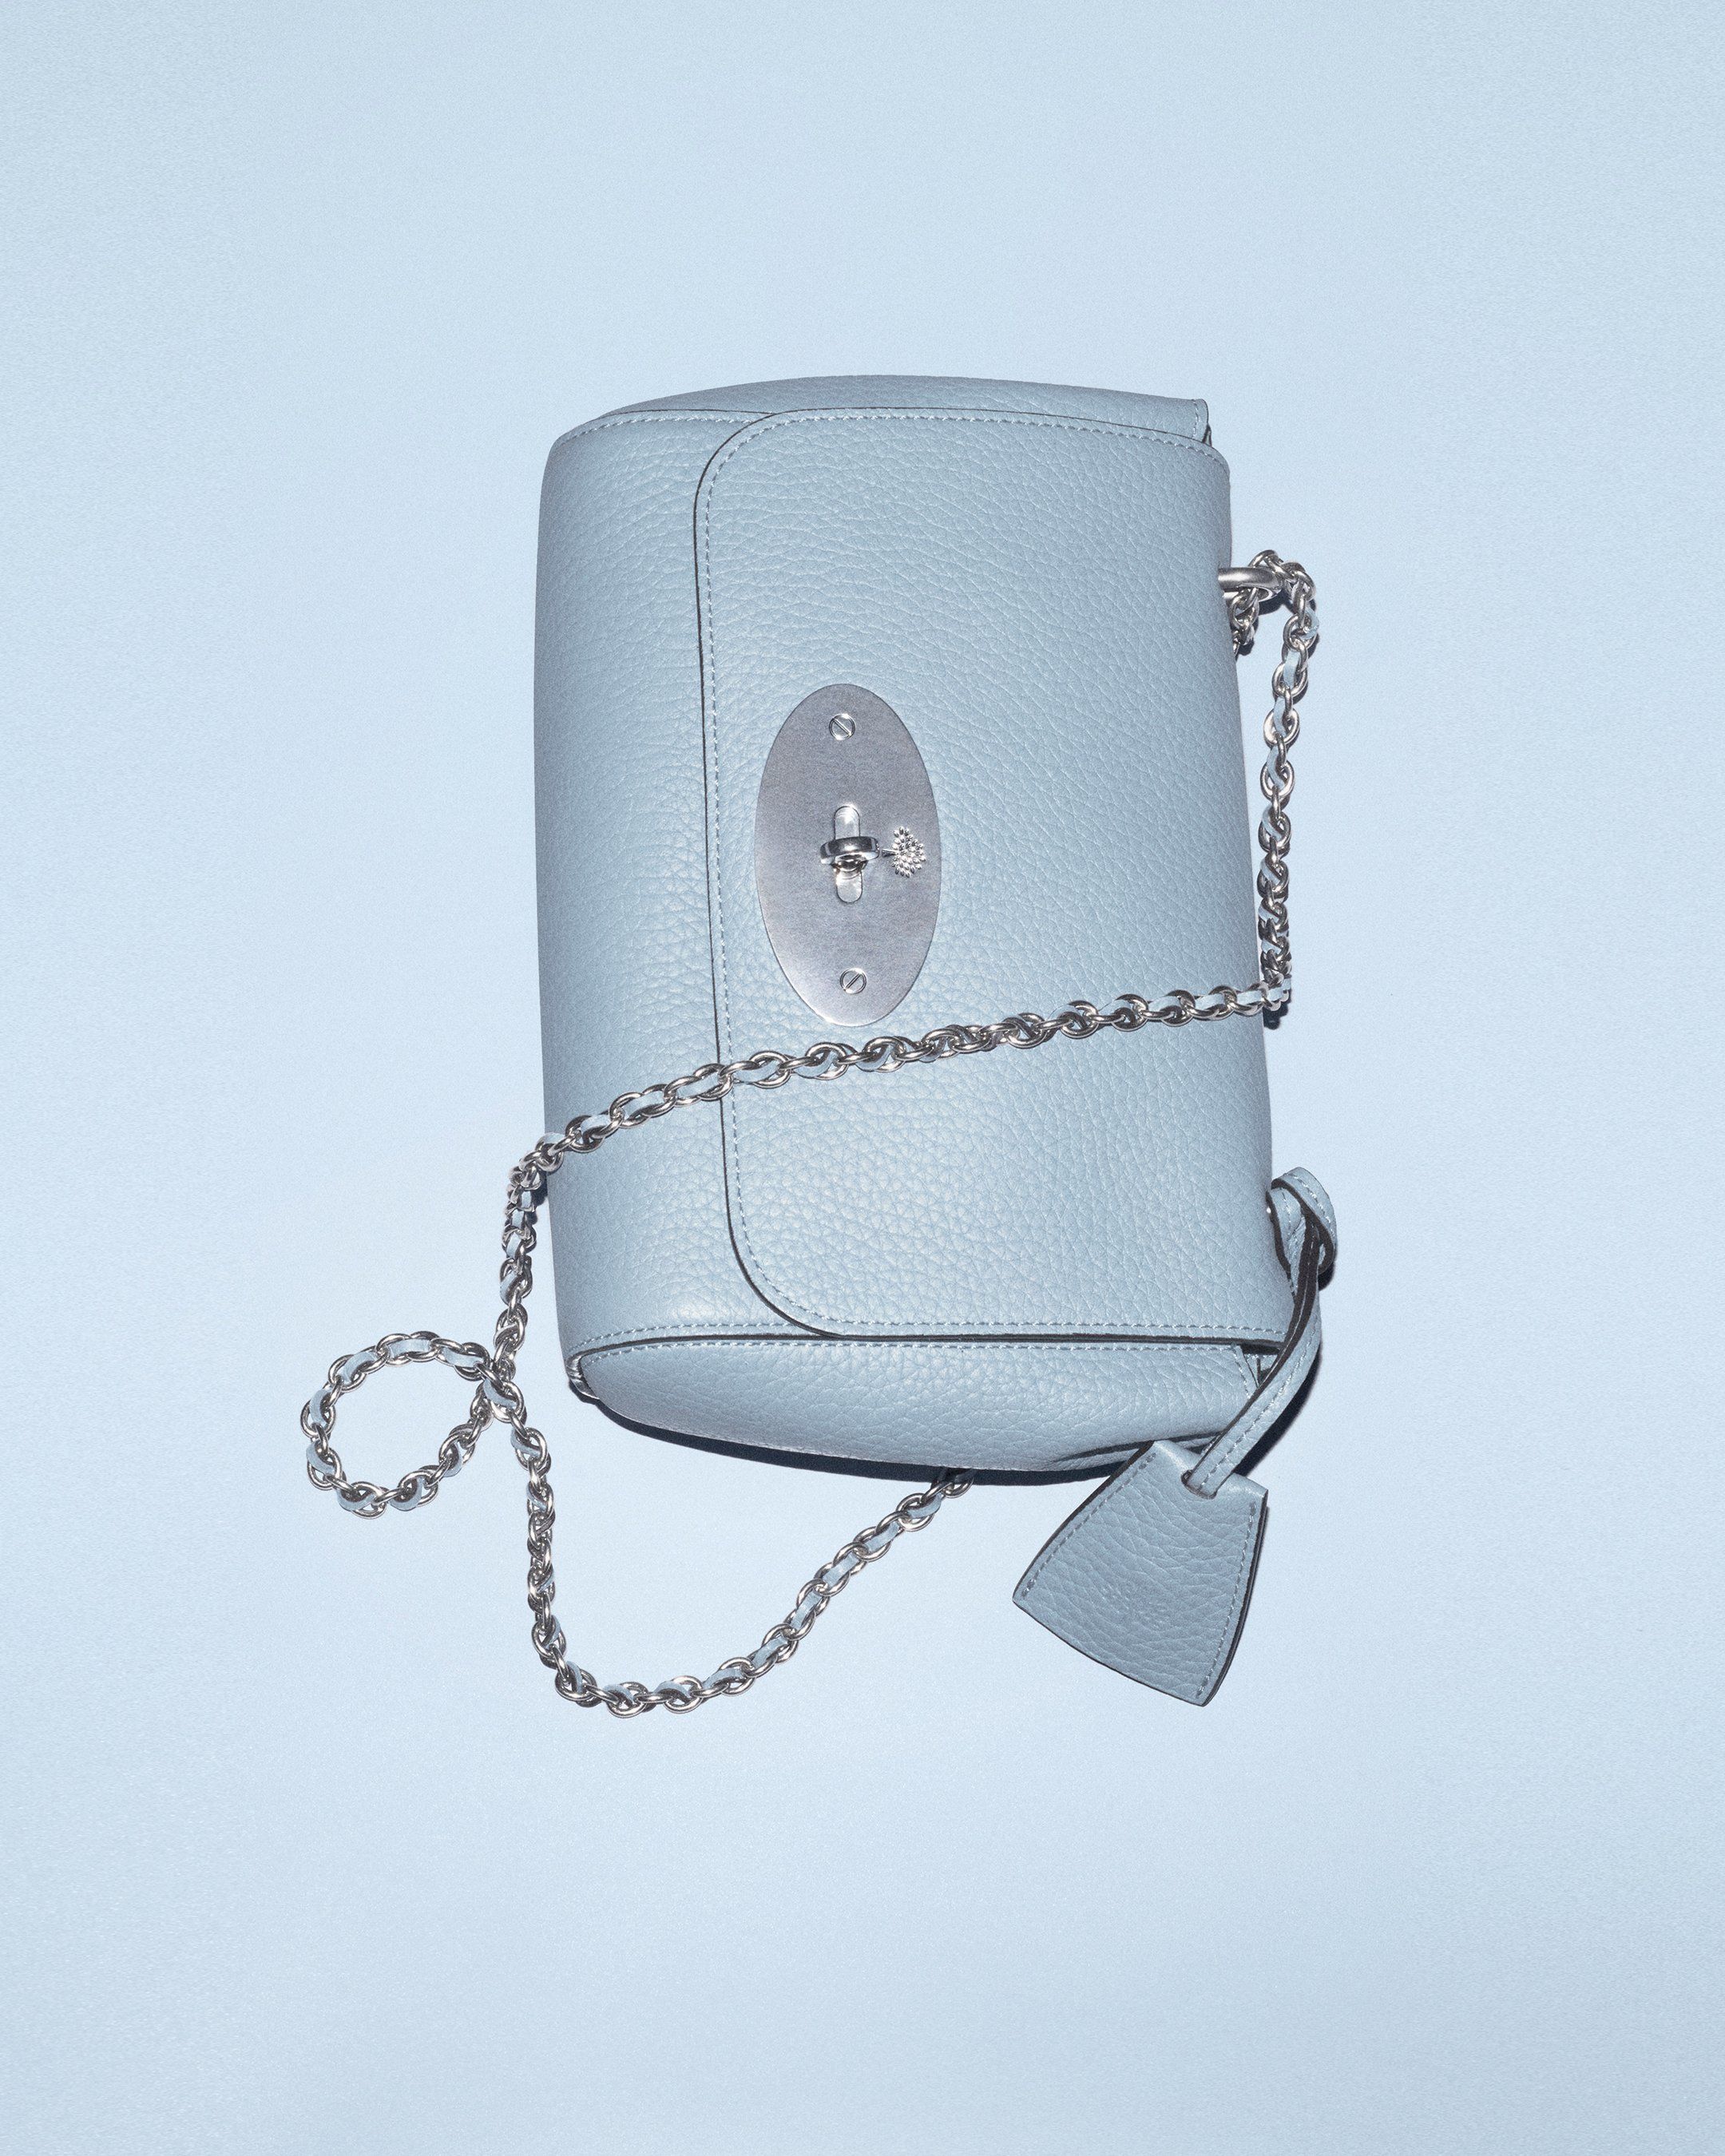 Mulberry Lily handbag in light blue leather